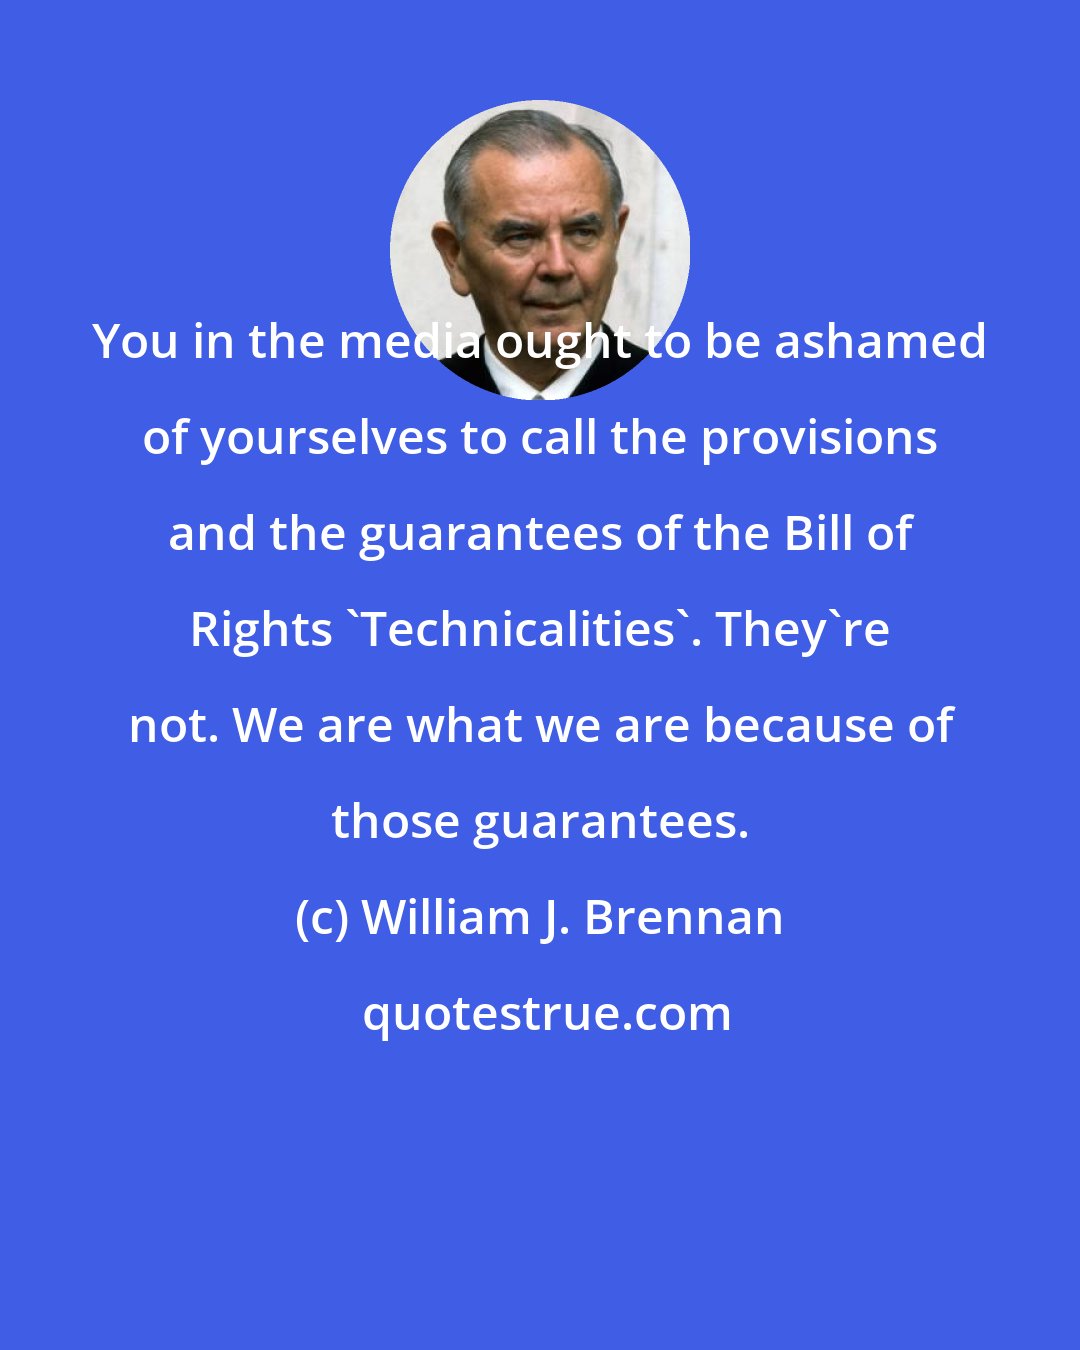 William J. Brennan: You in the media ought to be ashamed of yourselves to call the provisions and the guarantees of the Bill of Rights 'Technicalities'. They're not. We are what we are because of those guarantees.